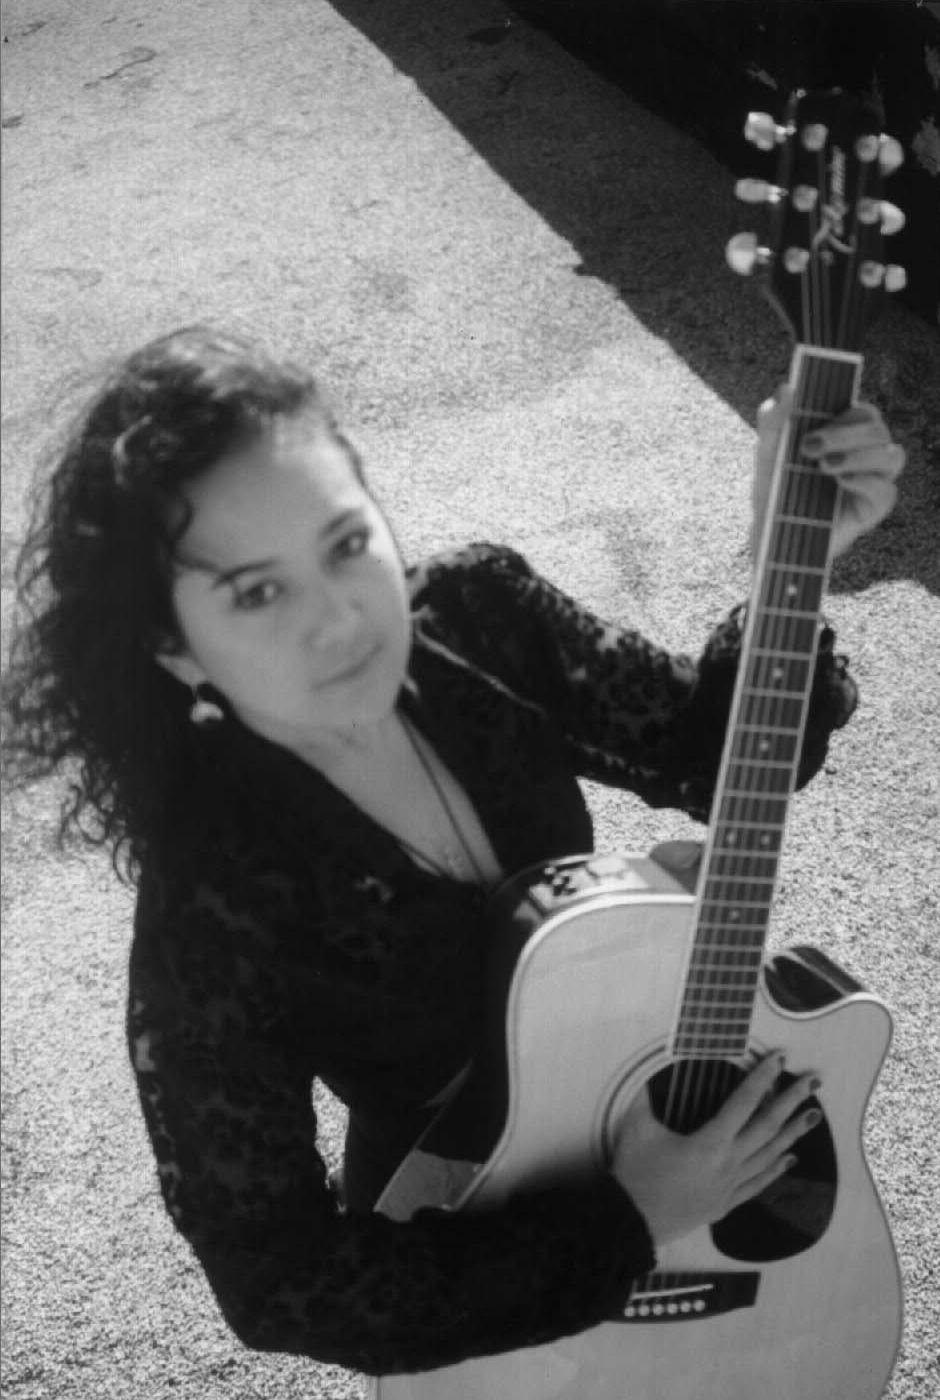 Melanie Silos, Songwriter.  Music is food for the soul, and reading is empowerment.